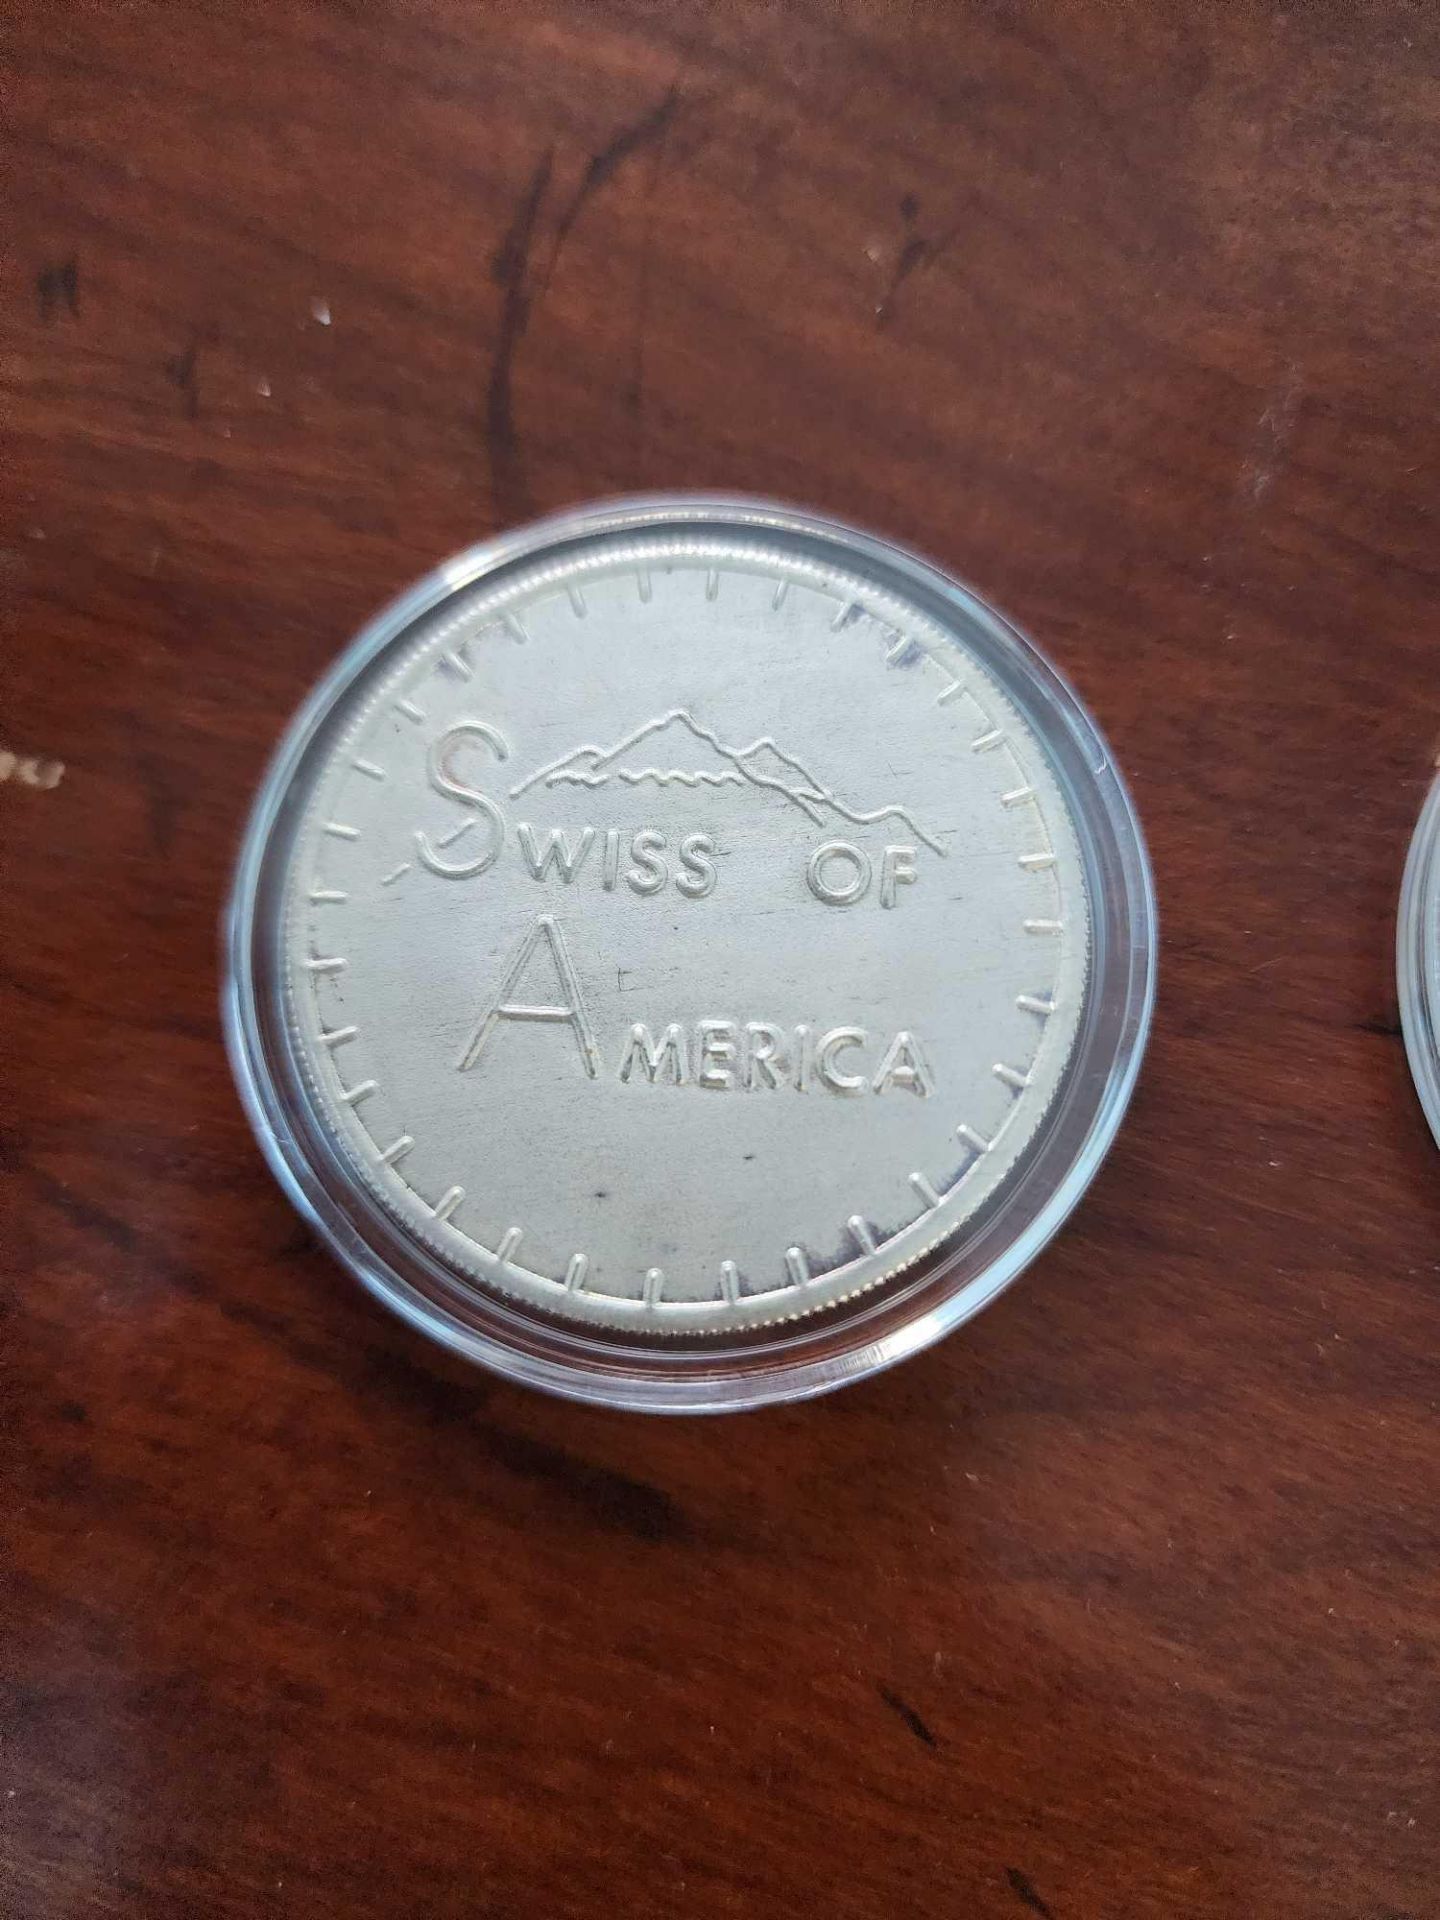 2 Swiss of America Silver Coins - Image 2 of 5